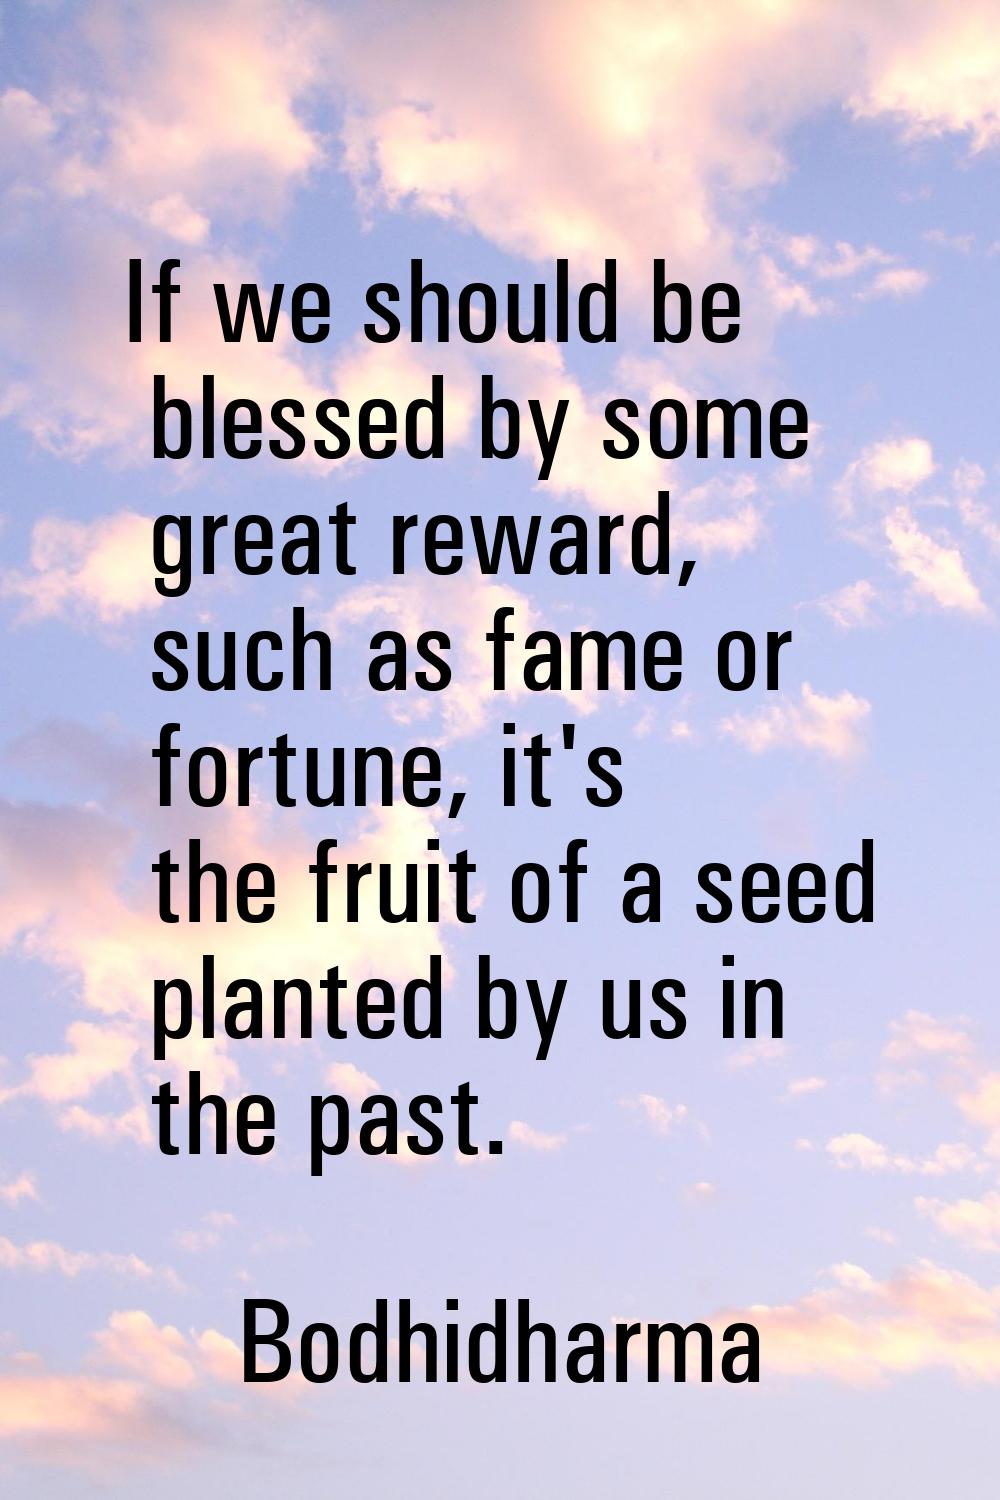 If we should be blessed by some great reward, such as fame or fortune, it's the fruit of a seed pla